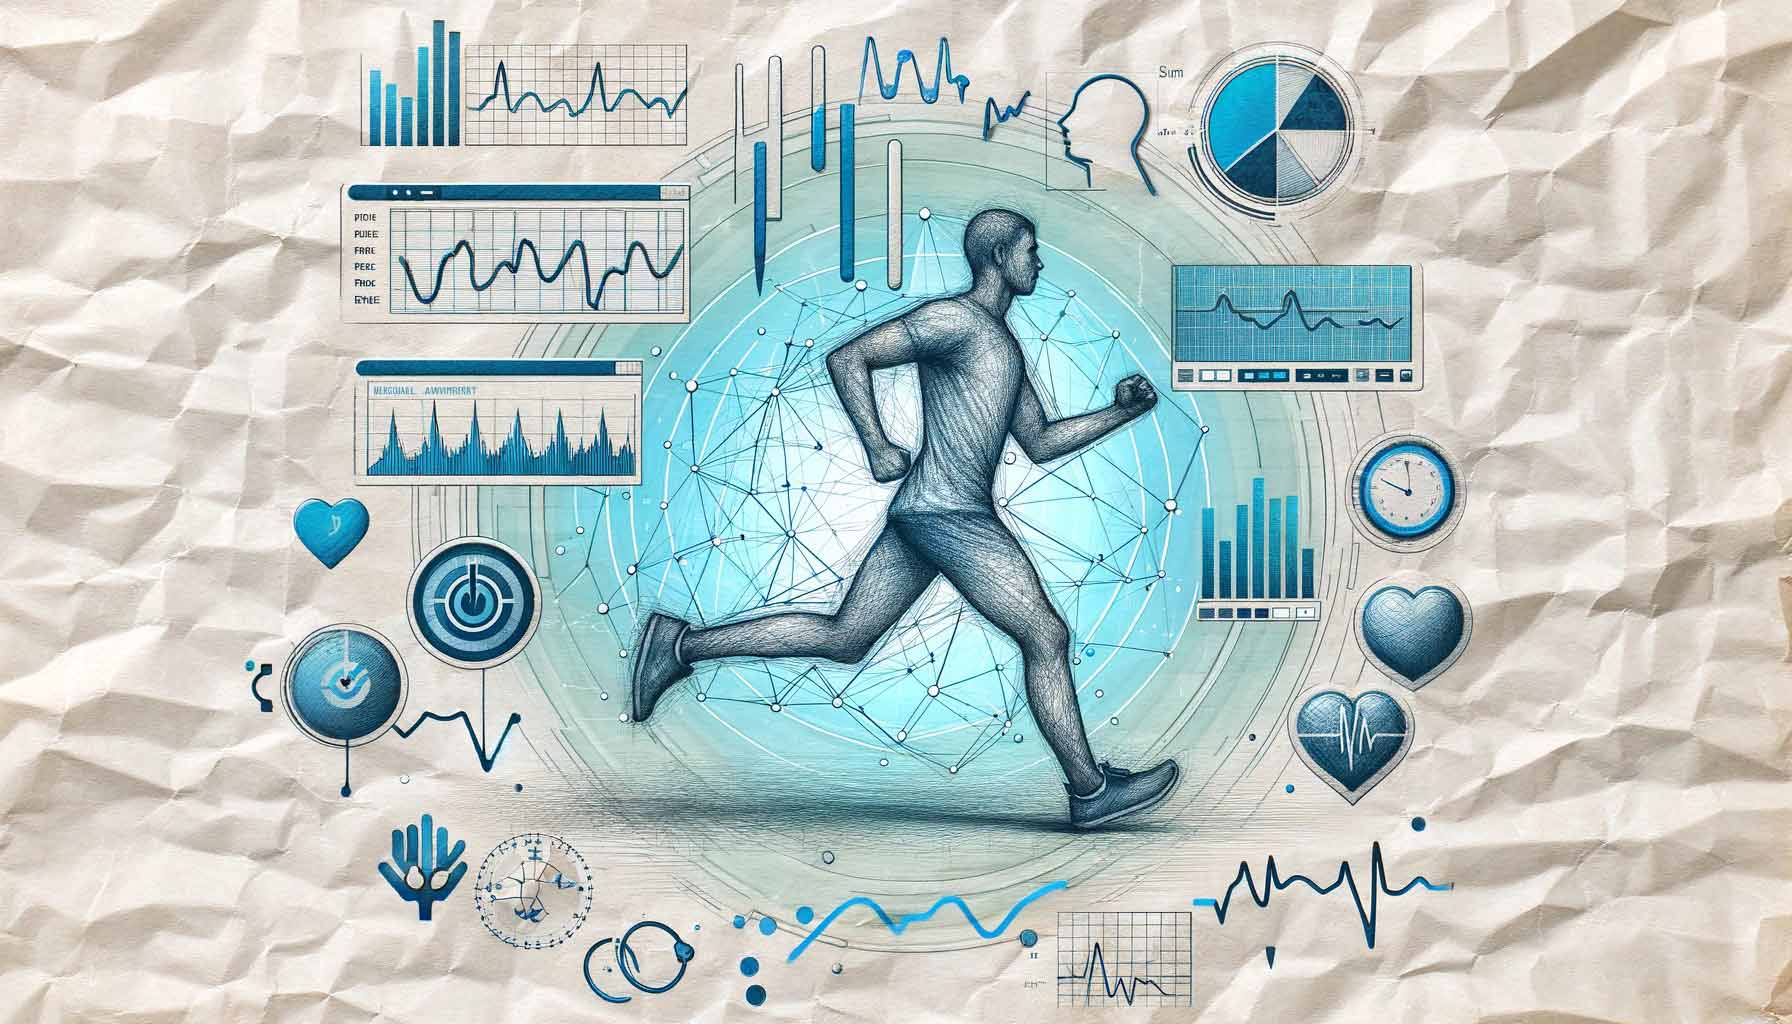 Illustration of a person running surrounded by various charts and graphs related to physical activity and health metrics on a crumpled paper background, highlighting the detailed analysis achieved through AI-driven insights.